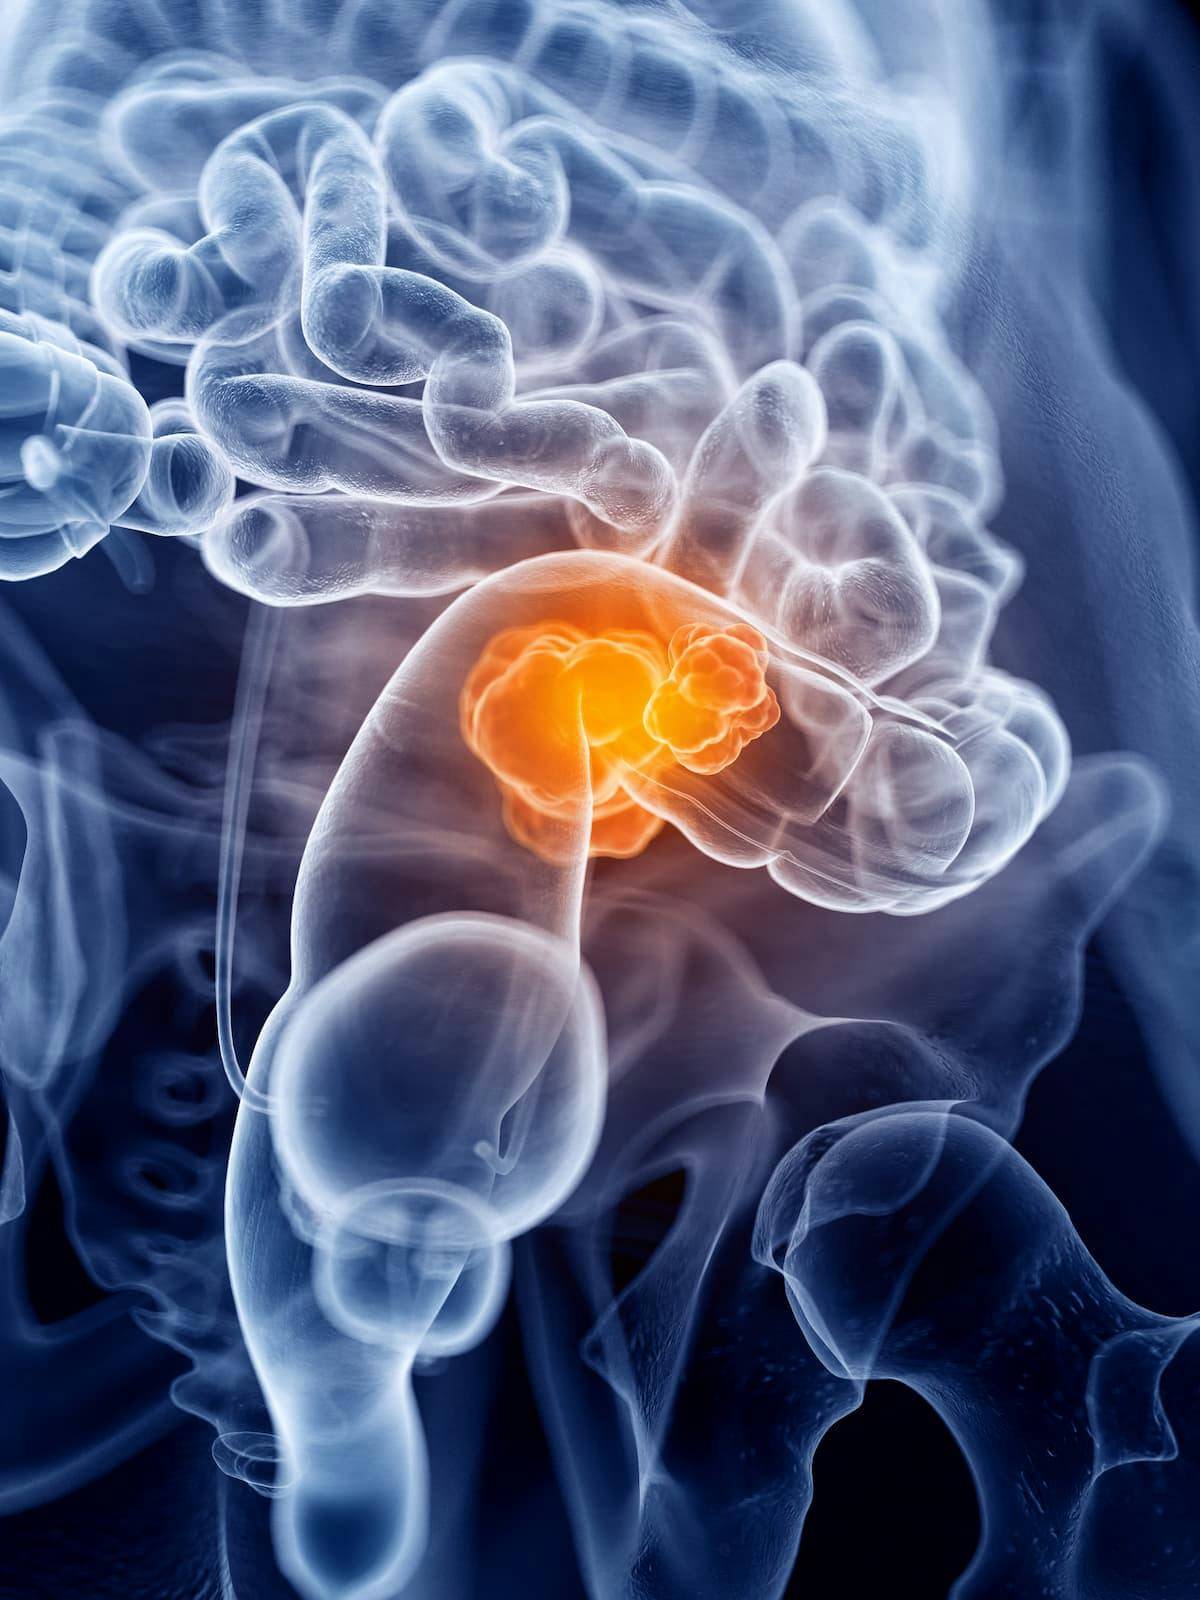 According to findings from a biomarker analysis of the phase 2 TheraP trial, mean standardized uptake value of PSMA-PET predicted favorable responses to 177Lu-PSMA-617 compared with cabazitaxel in patients with metastatic castration-resistant prostate cancer.